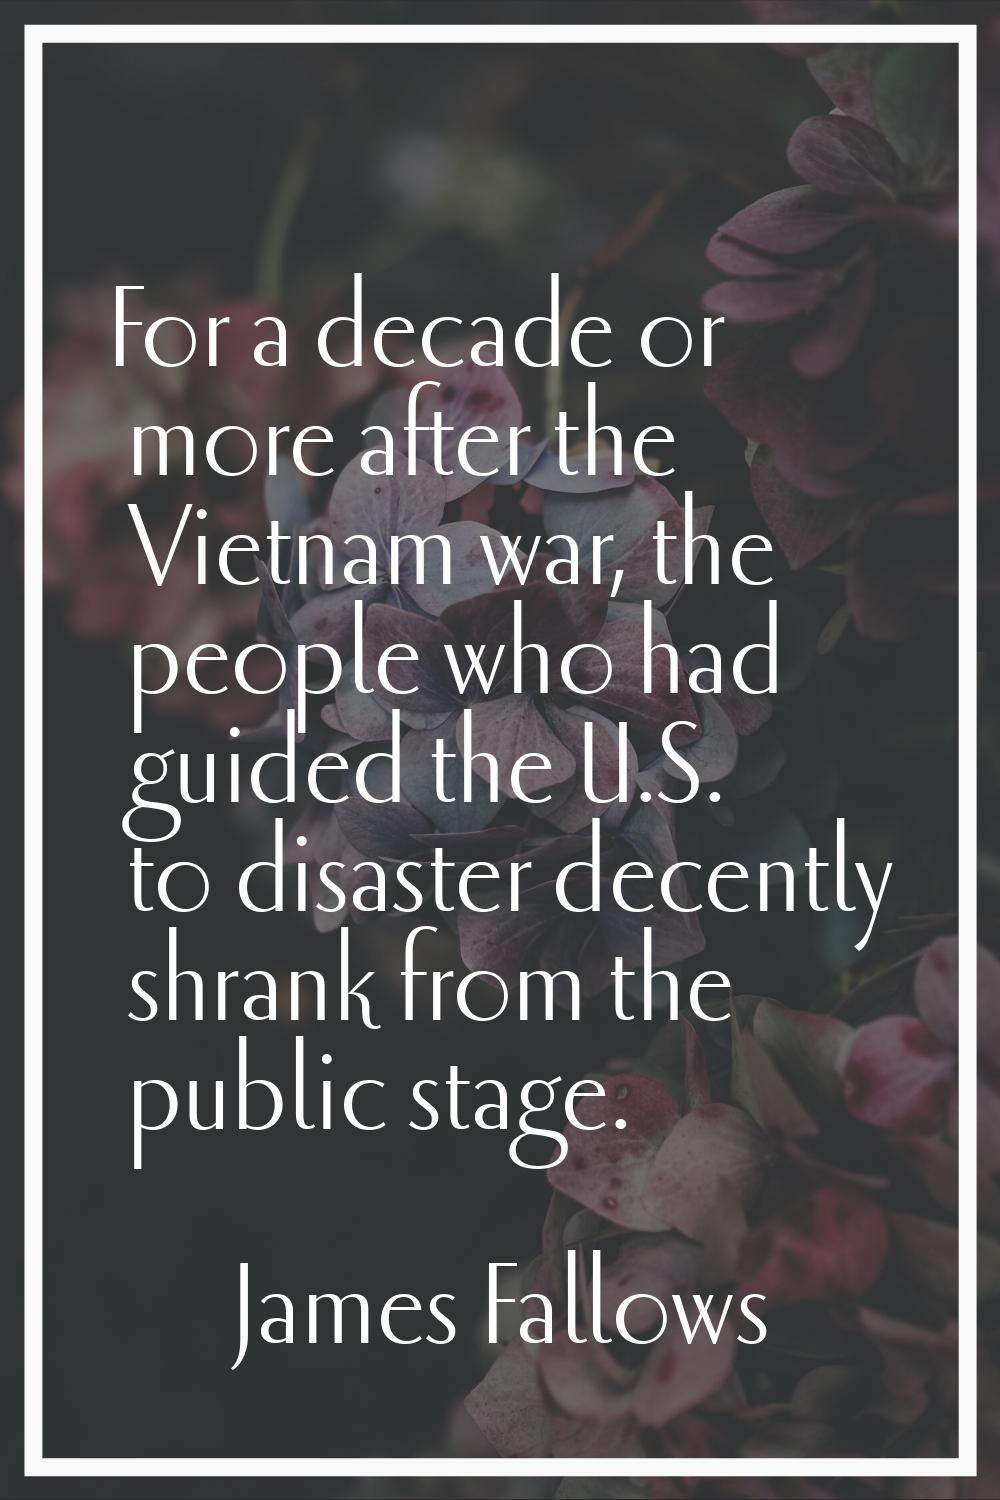 For a decade or more after the Vietnam war, the people who had guided the U.S. to disaster decently